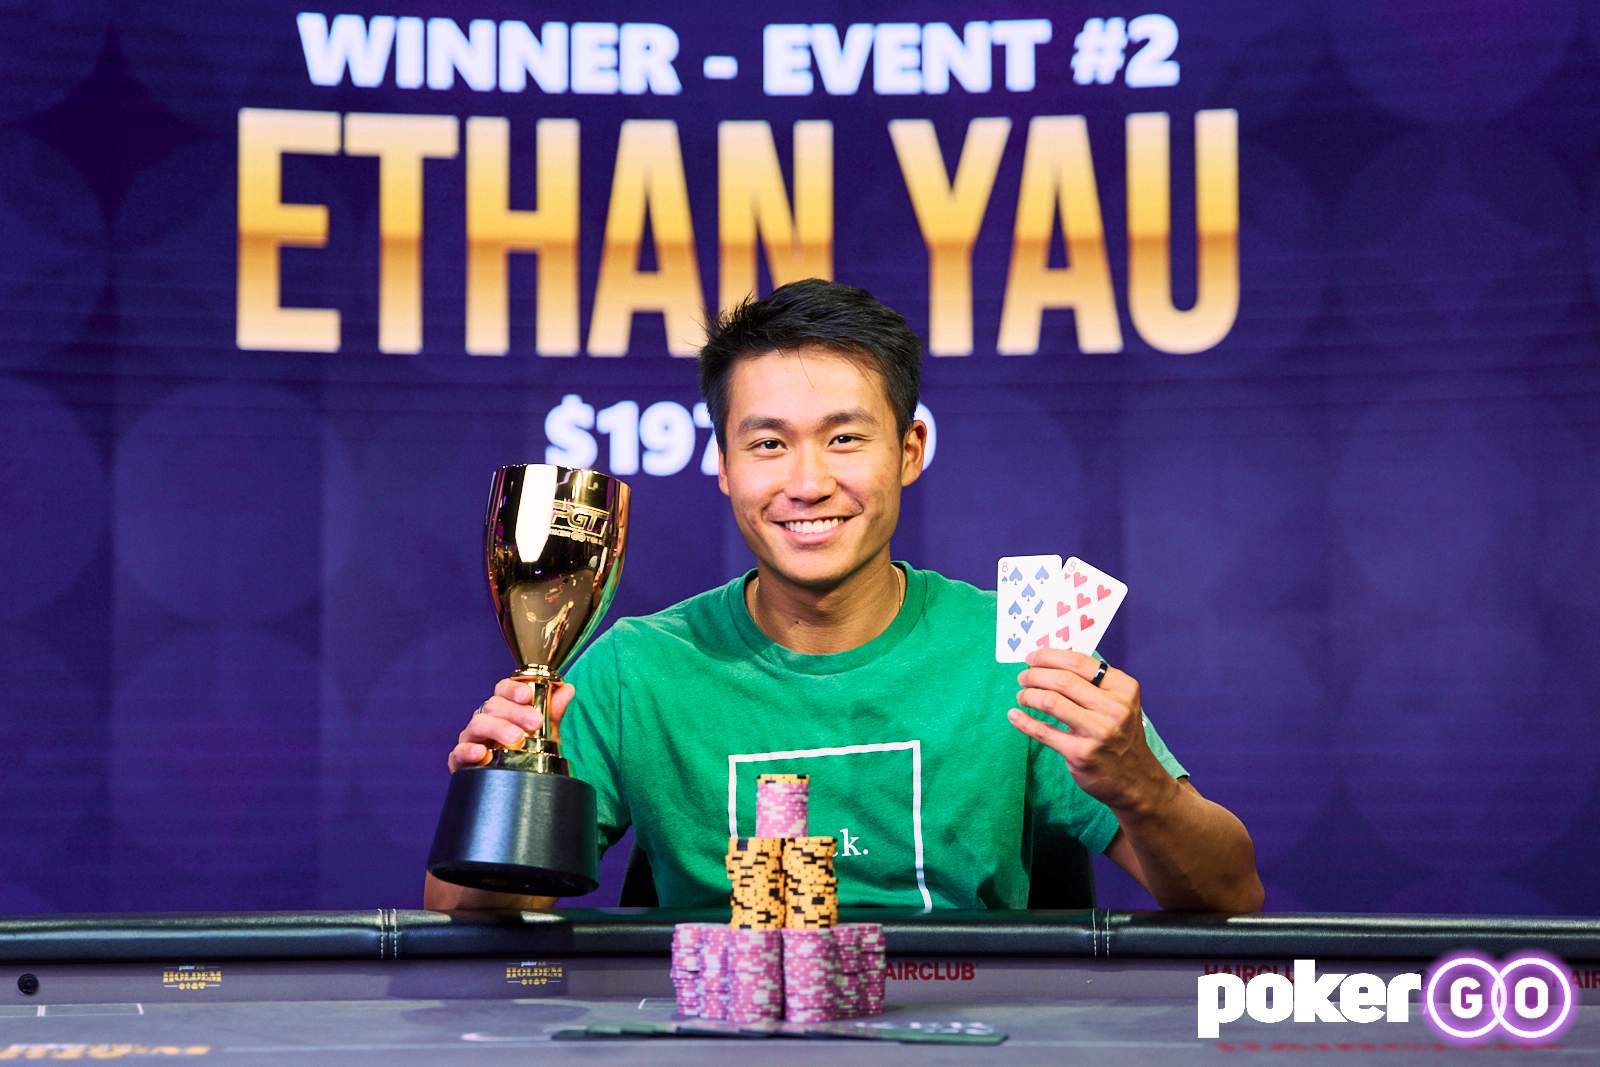 Ethan Yau Wins 2022 Poker Masters Event #2 for $197,600